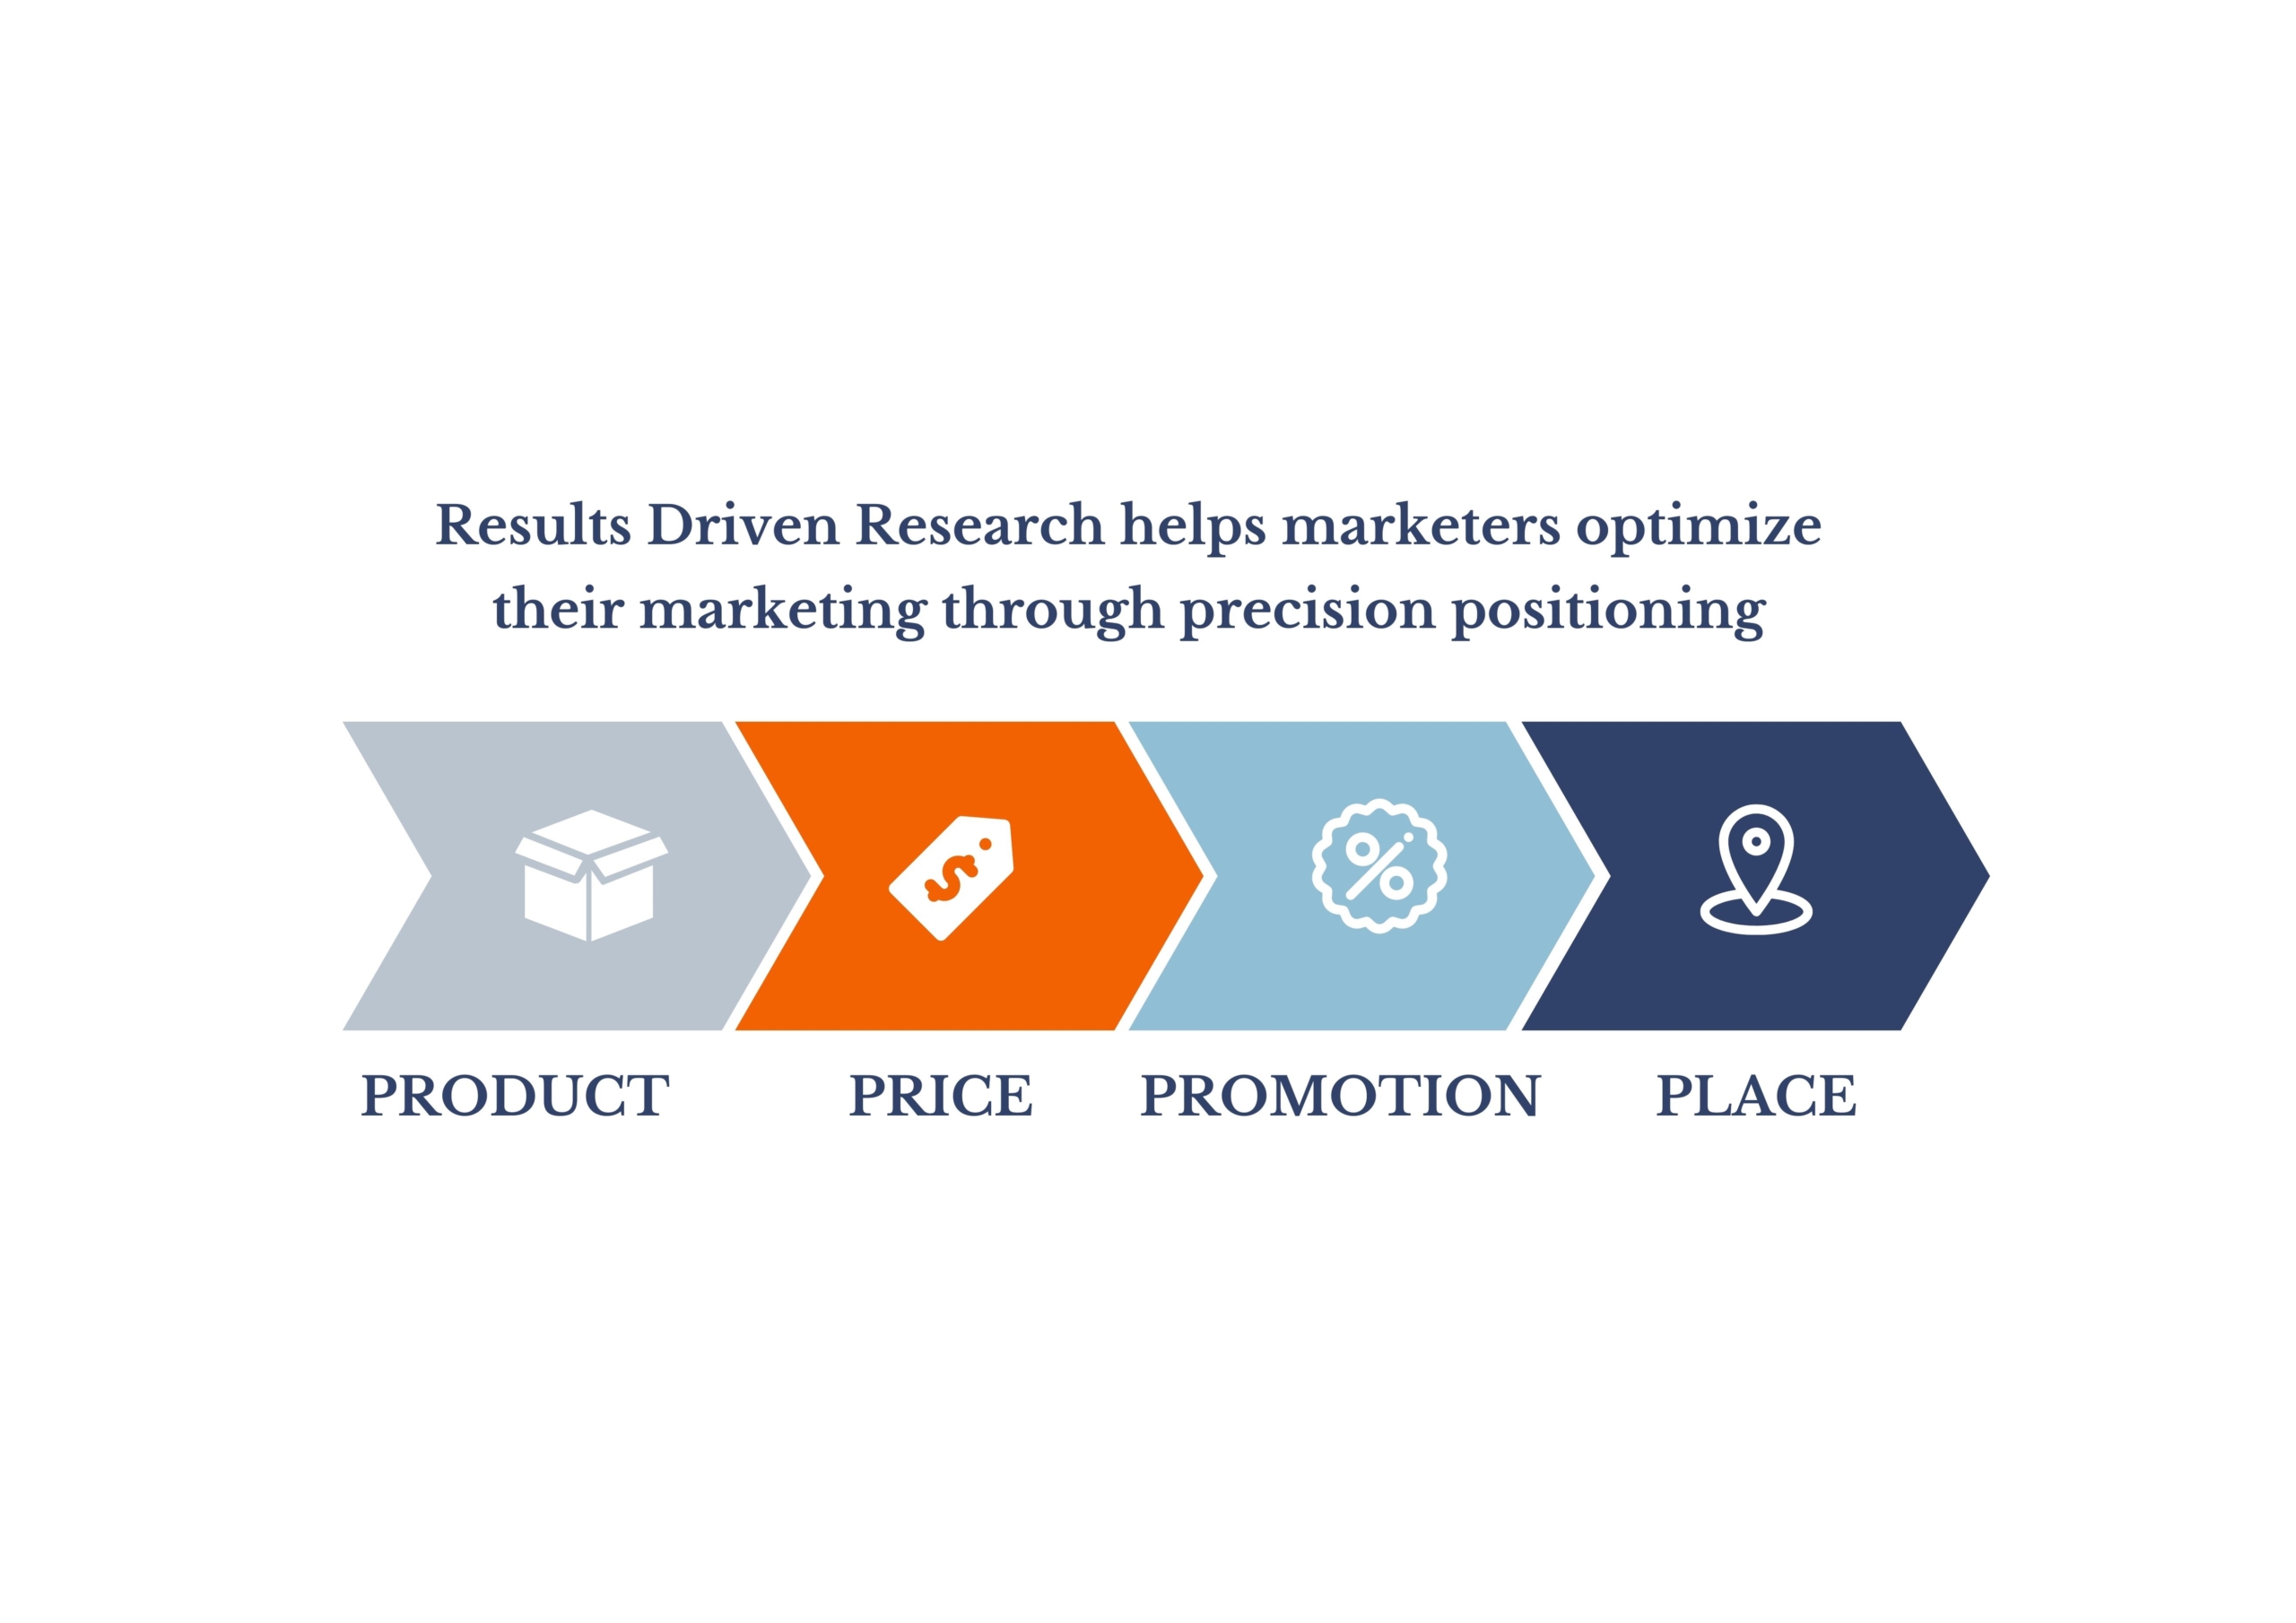 Brand Research Growth Strategies Graphic from MMR Strategy Group